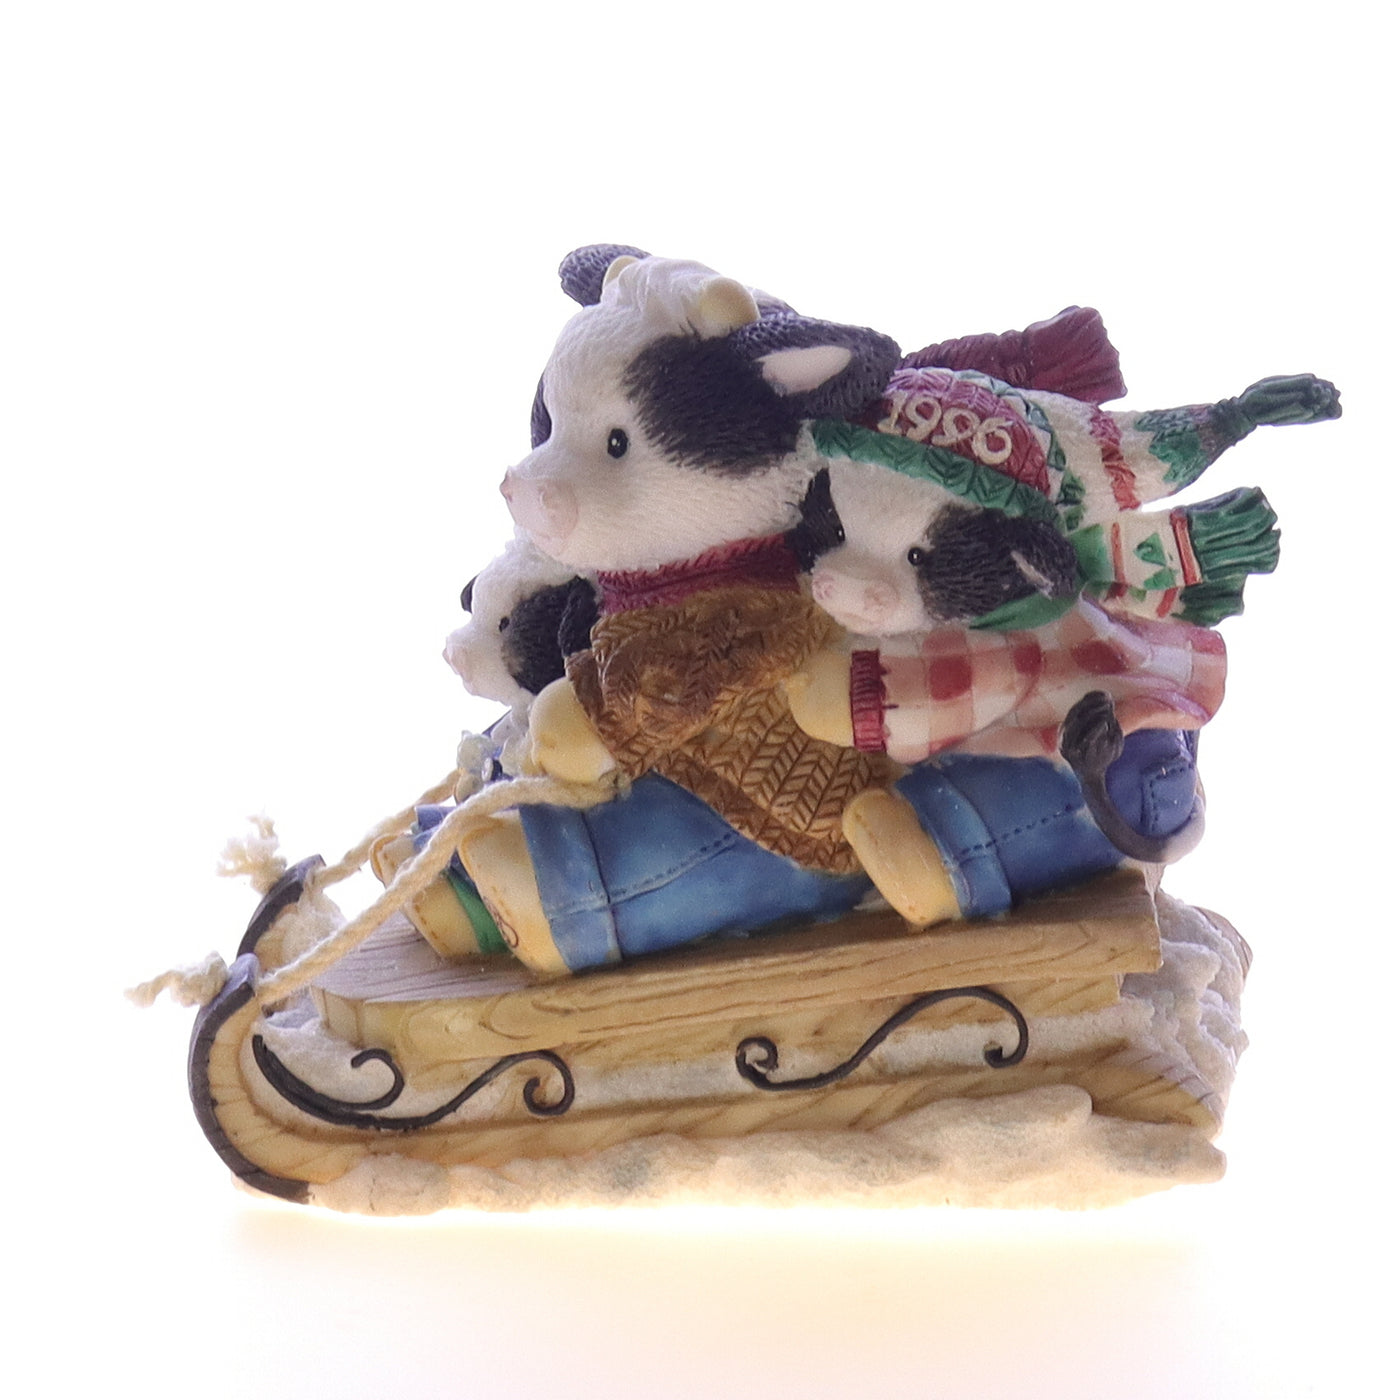 Marys_Moo_Moos_189669_Wheee_Are_Moovin_Christmas_Figurine_1996_Box Front View